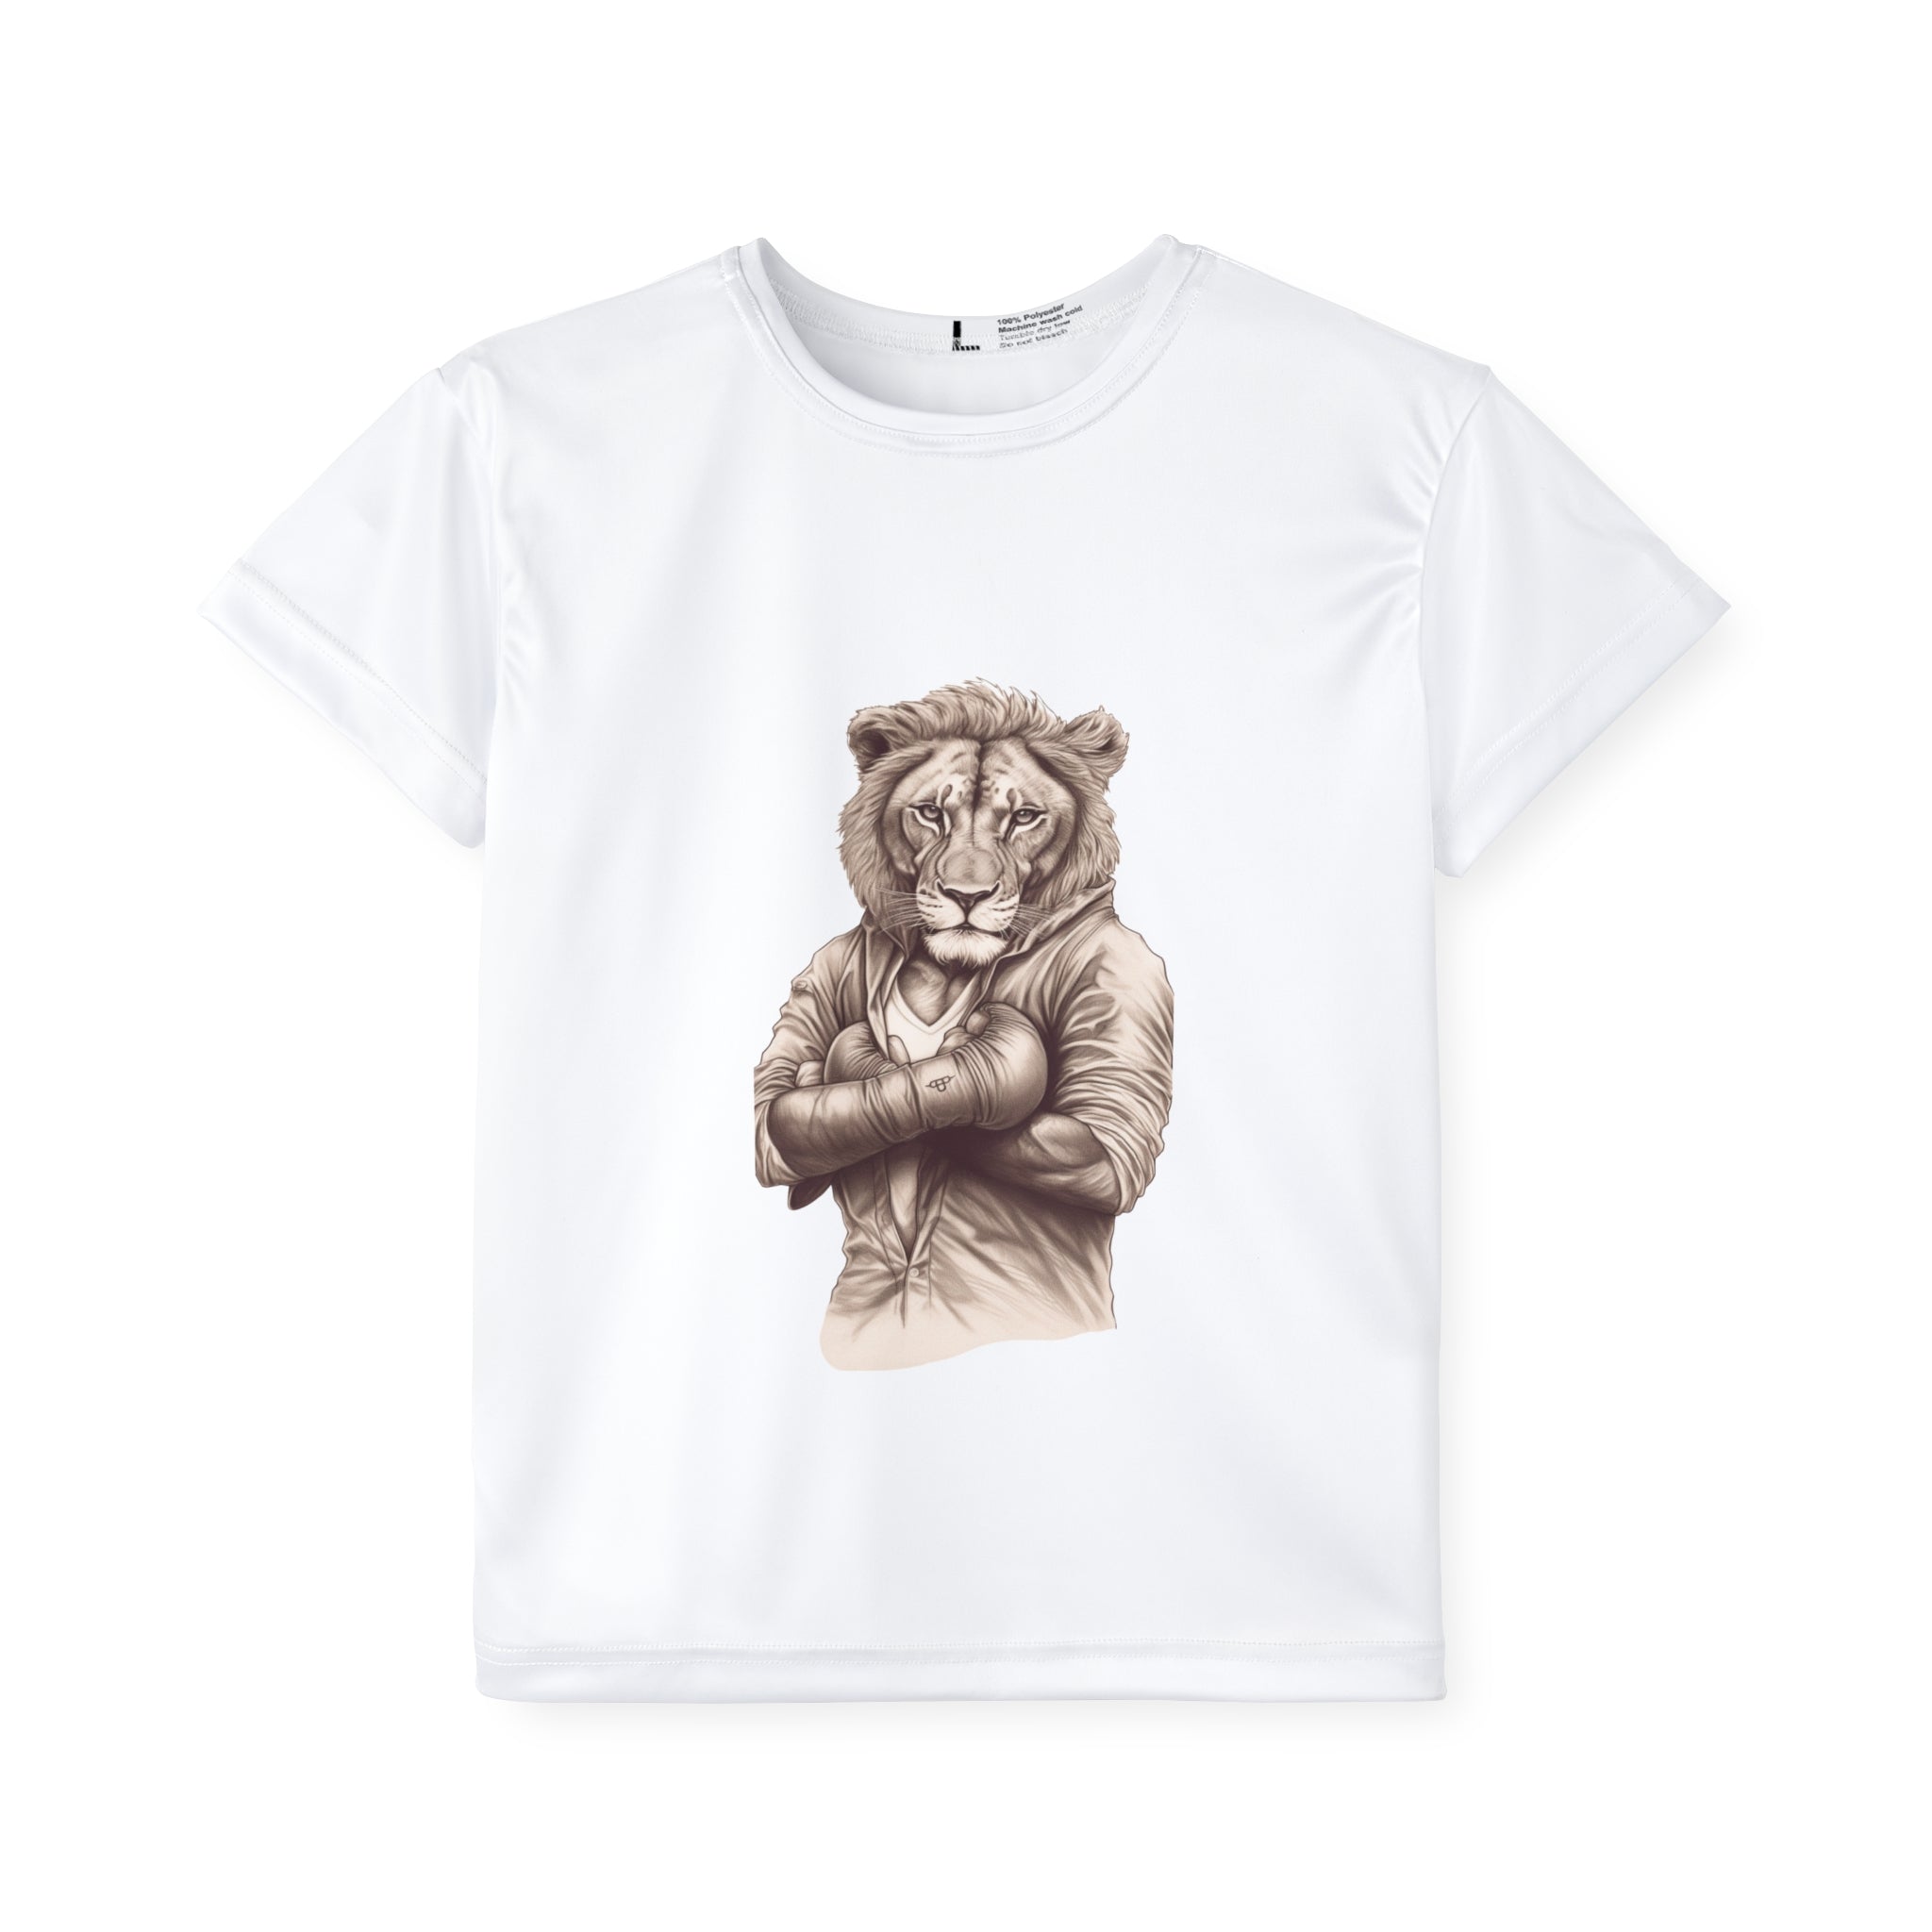 Boxing Fan Lion Sketch Art Birthday Kid Gift Athletic T-Shirt for Young Boxers Sports Shirt for Kids Activities Gift